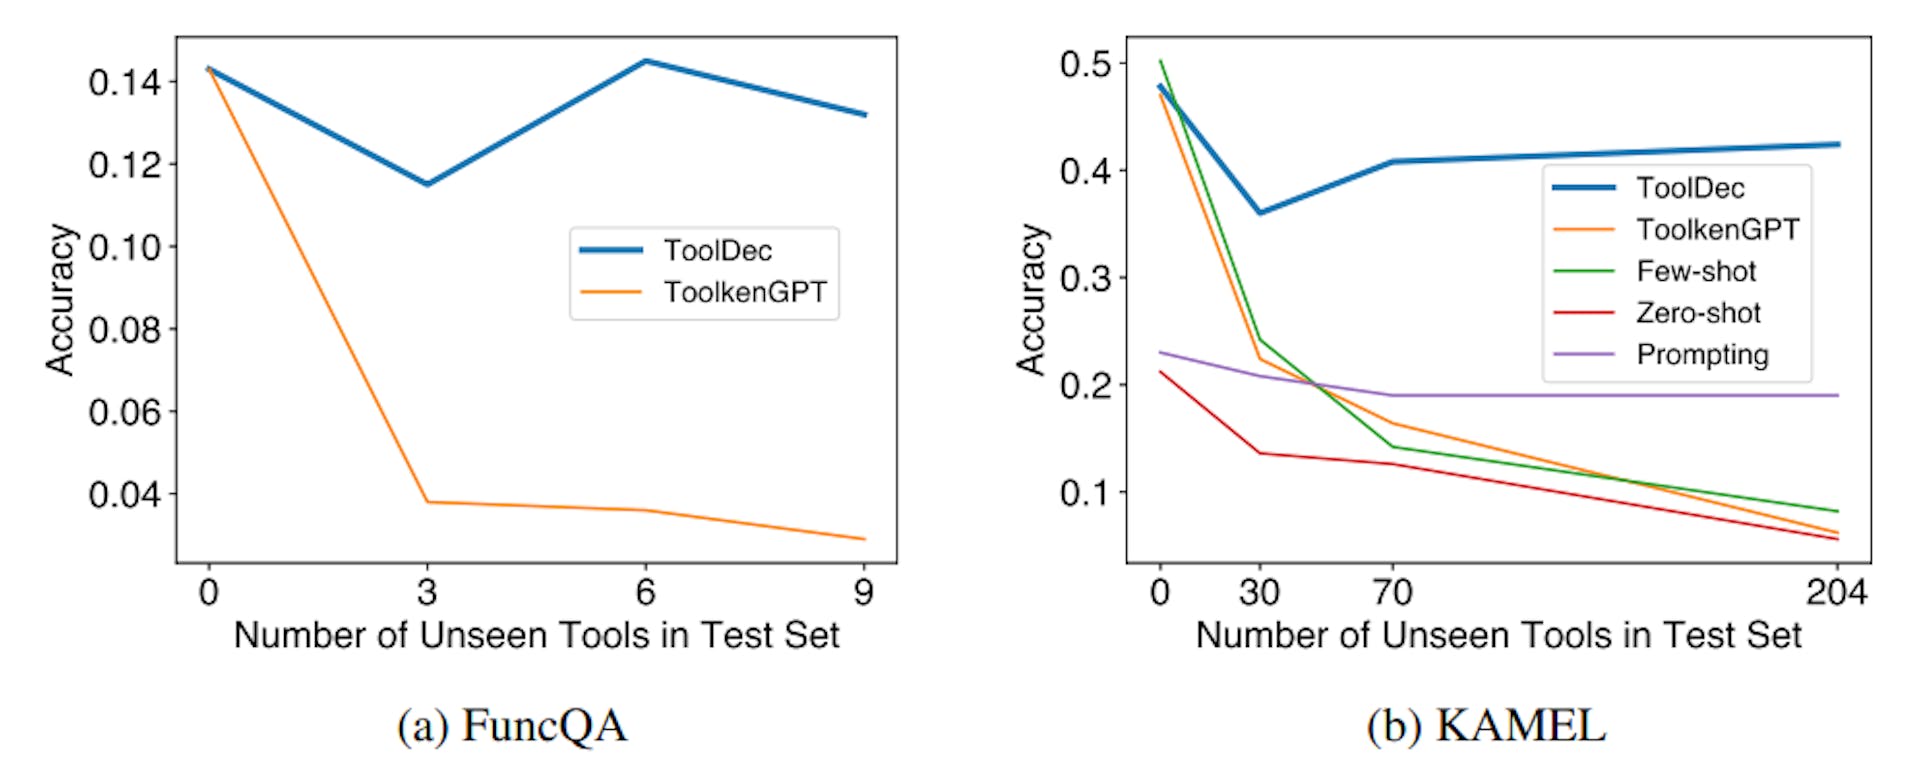 Figure 5: Results on KAMEL and FuncQA. As the number of unseen tools increased, all baselines experienced a significant performance drop. But TOOLDEC kept a similar high performance though it had only seen a small subset (30 out of 234 on KAMEL and 4 out of 13 on FuncQA) of tools.